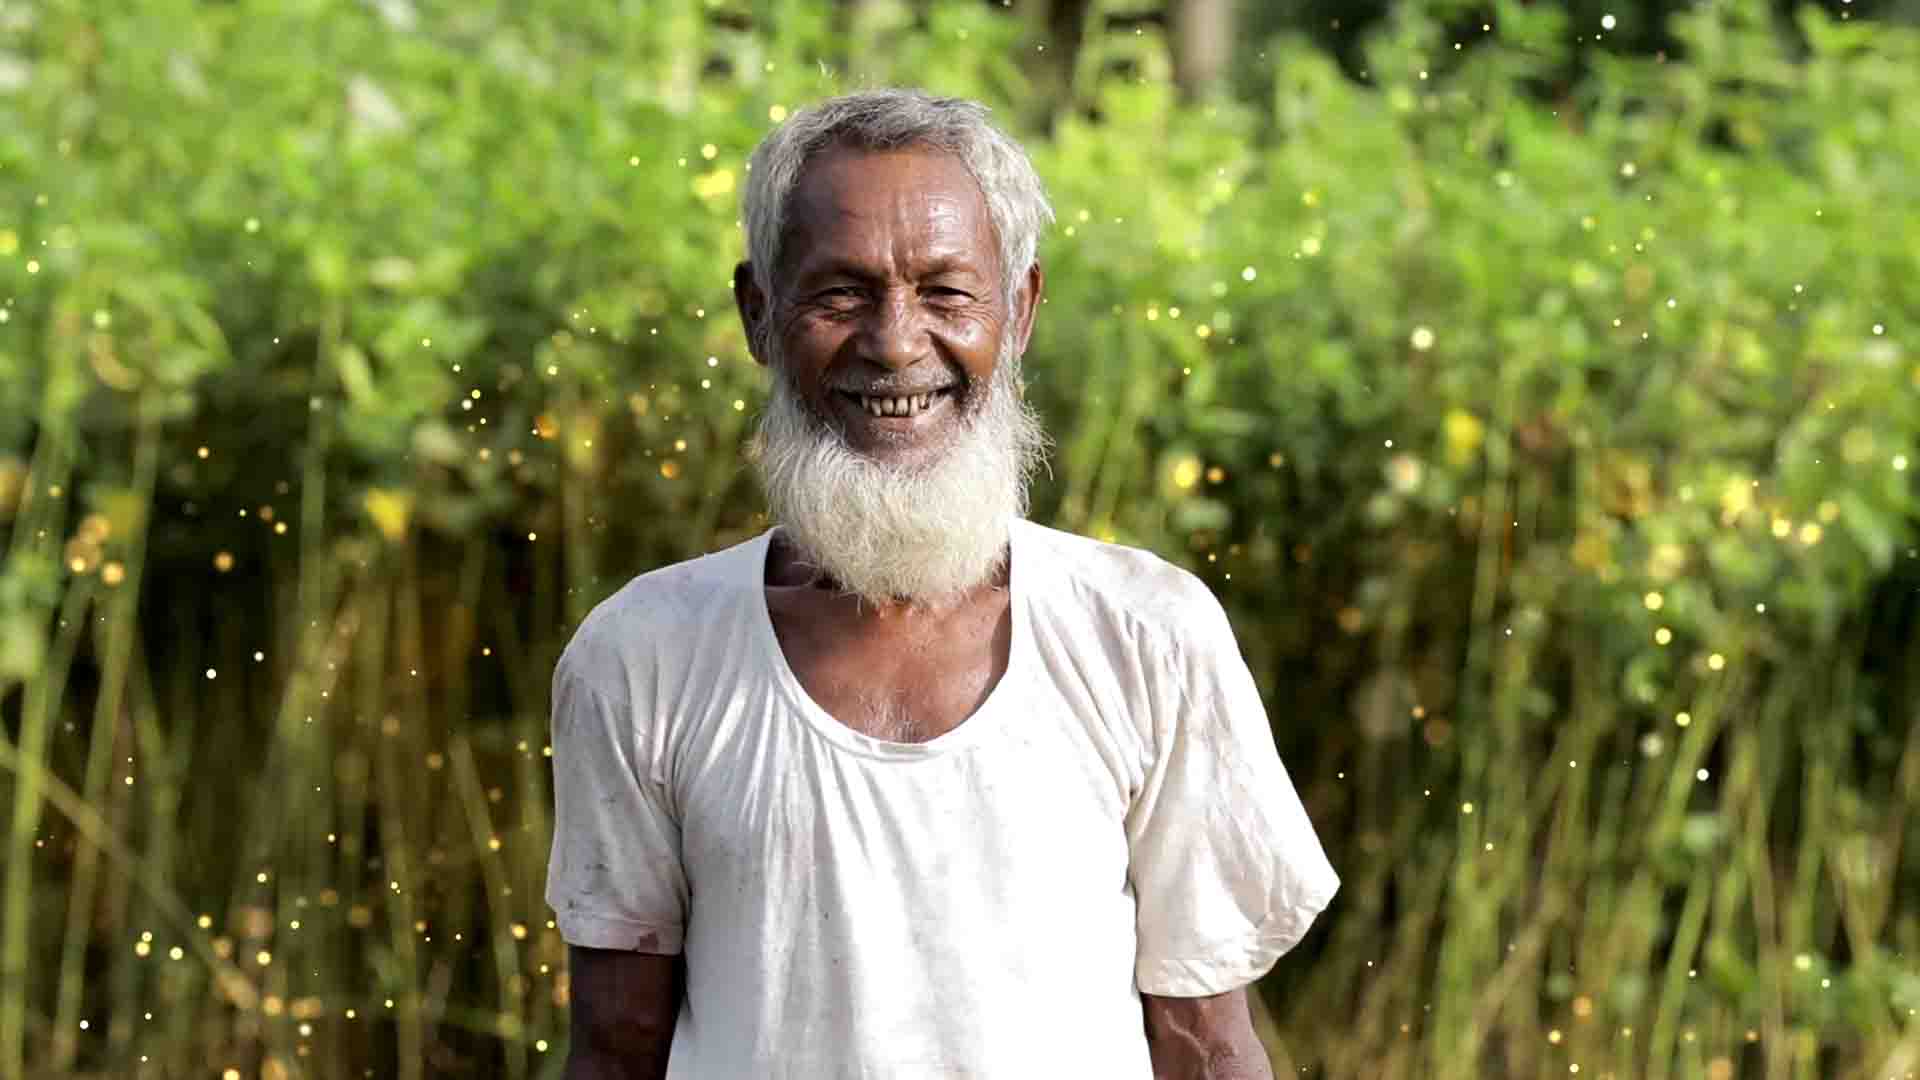 Arif Sonnet's heartwarming documentary for HSBC, 'Spreading Happiness: Joy of Giving,' shares the essence of giving and spreading joy.